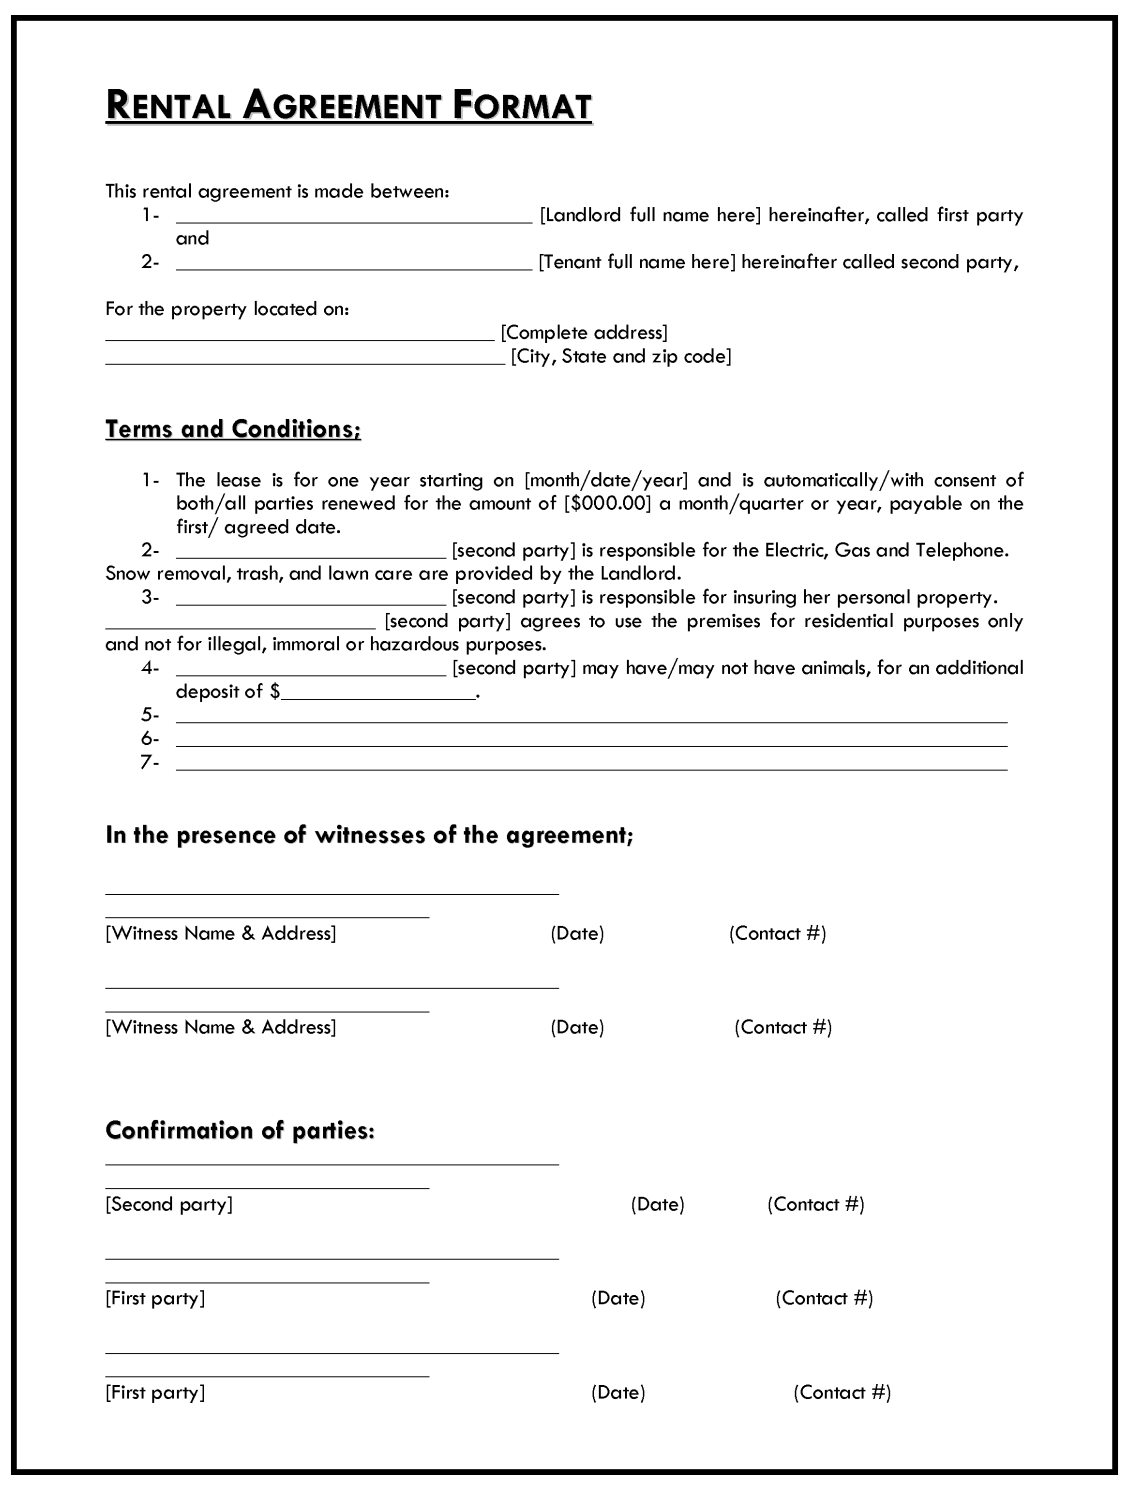 free-rent-agreement-letter-16-rental-agreement-letter-templates-word-apple-pages-google-docs